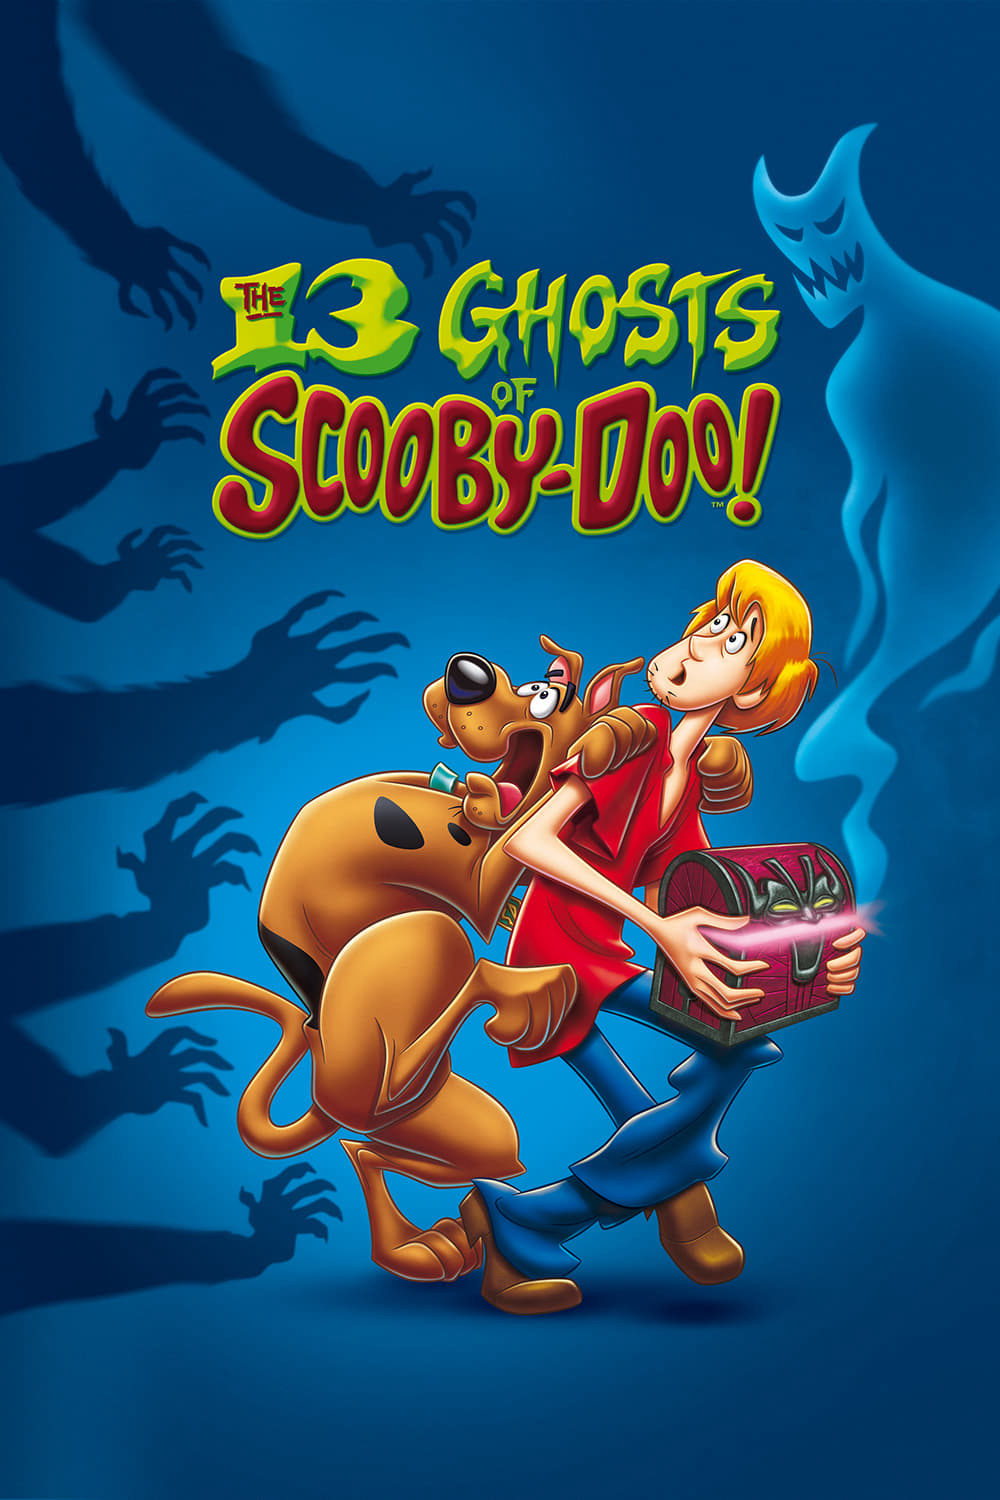 Xem Phim The 13 Ghosts of Scooby-Doo (The 13 Ghosts of Scooby-Doo)